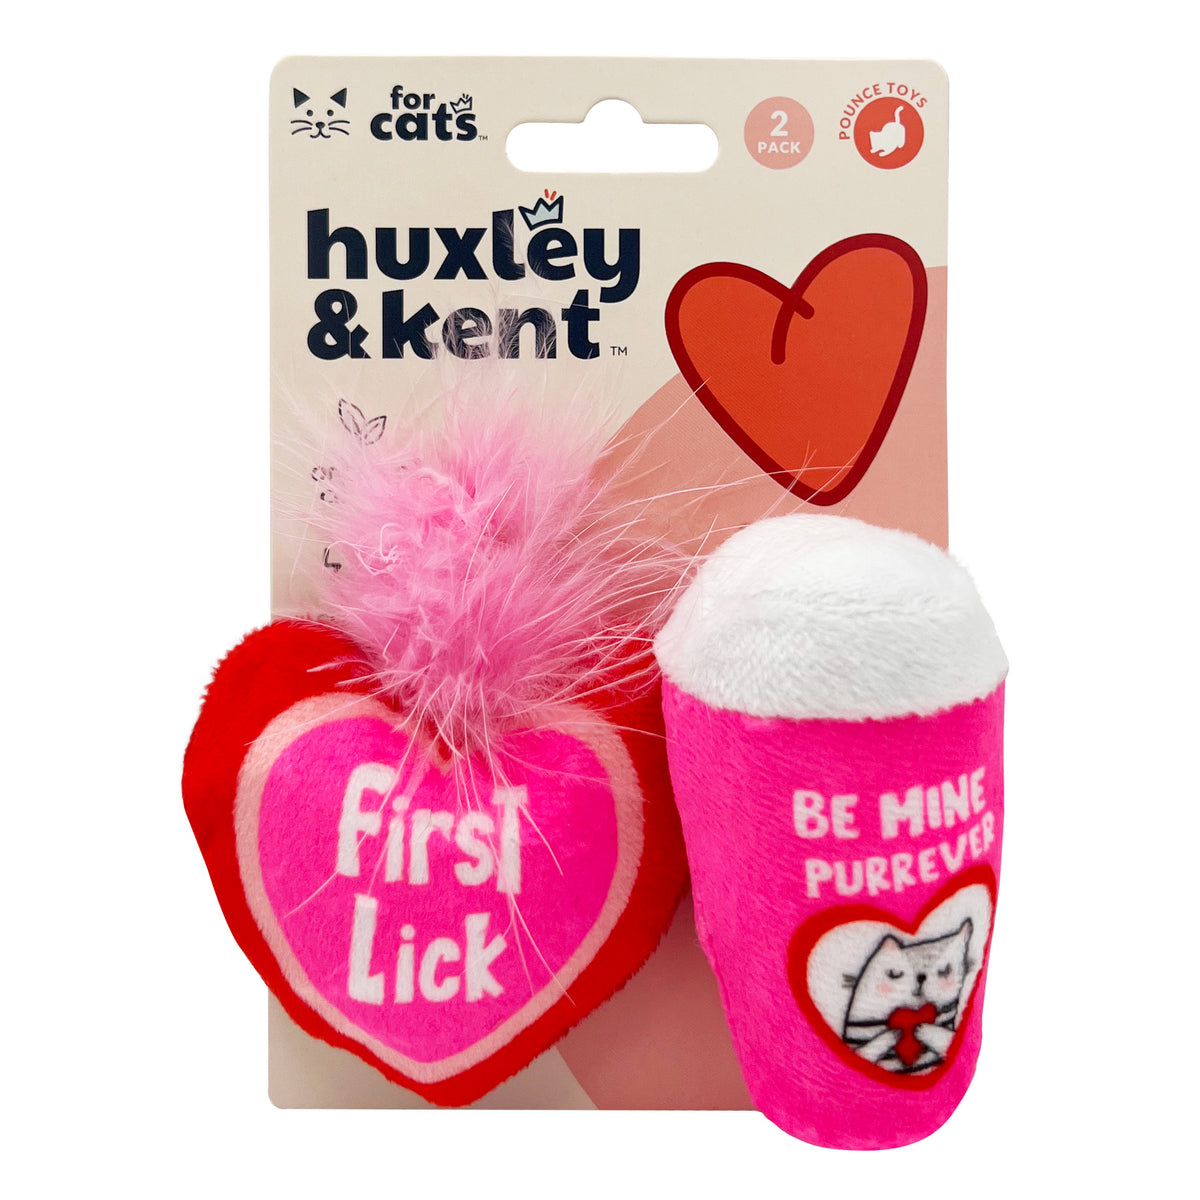 First Lick Heart &amp; Be Mine Coffee 2pk Cat Toy